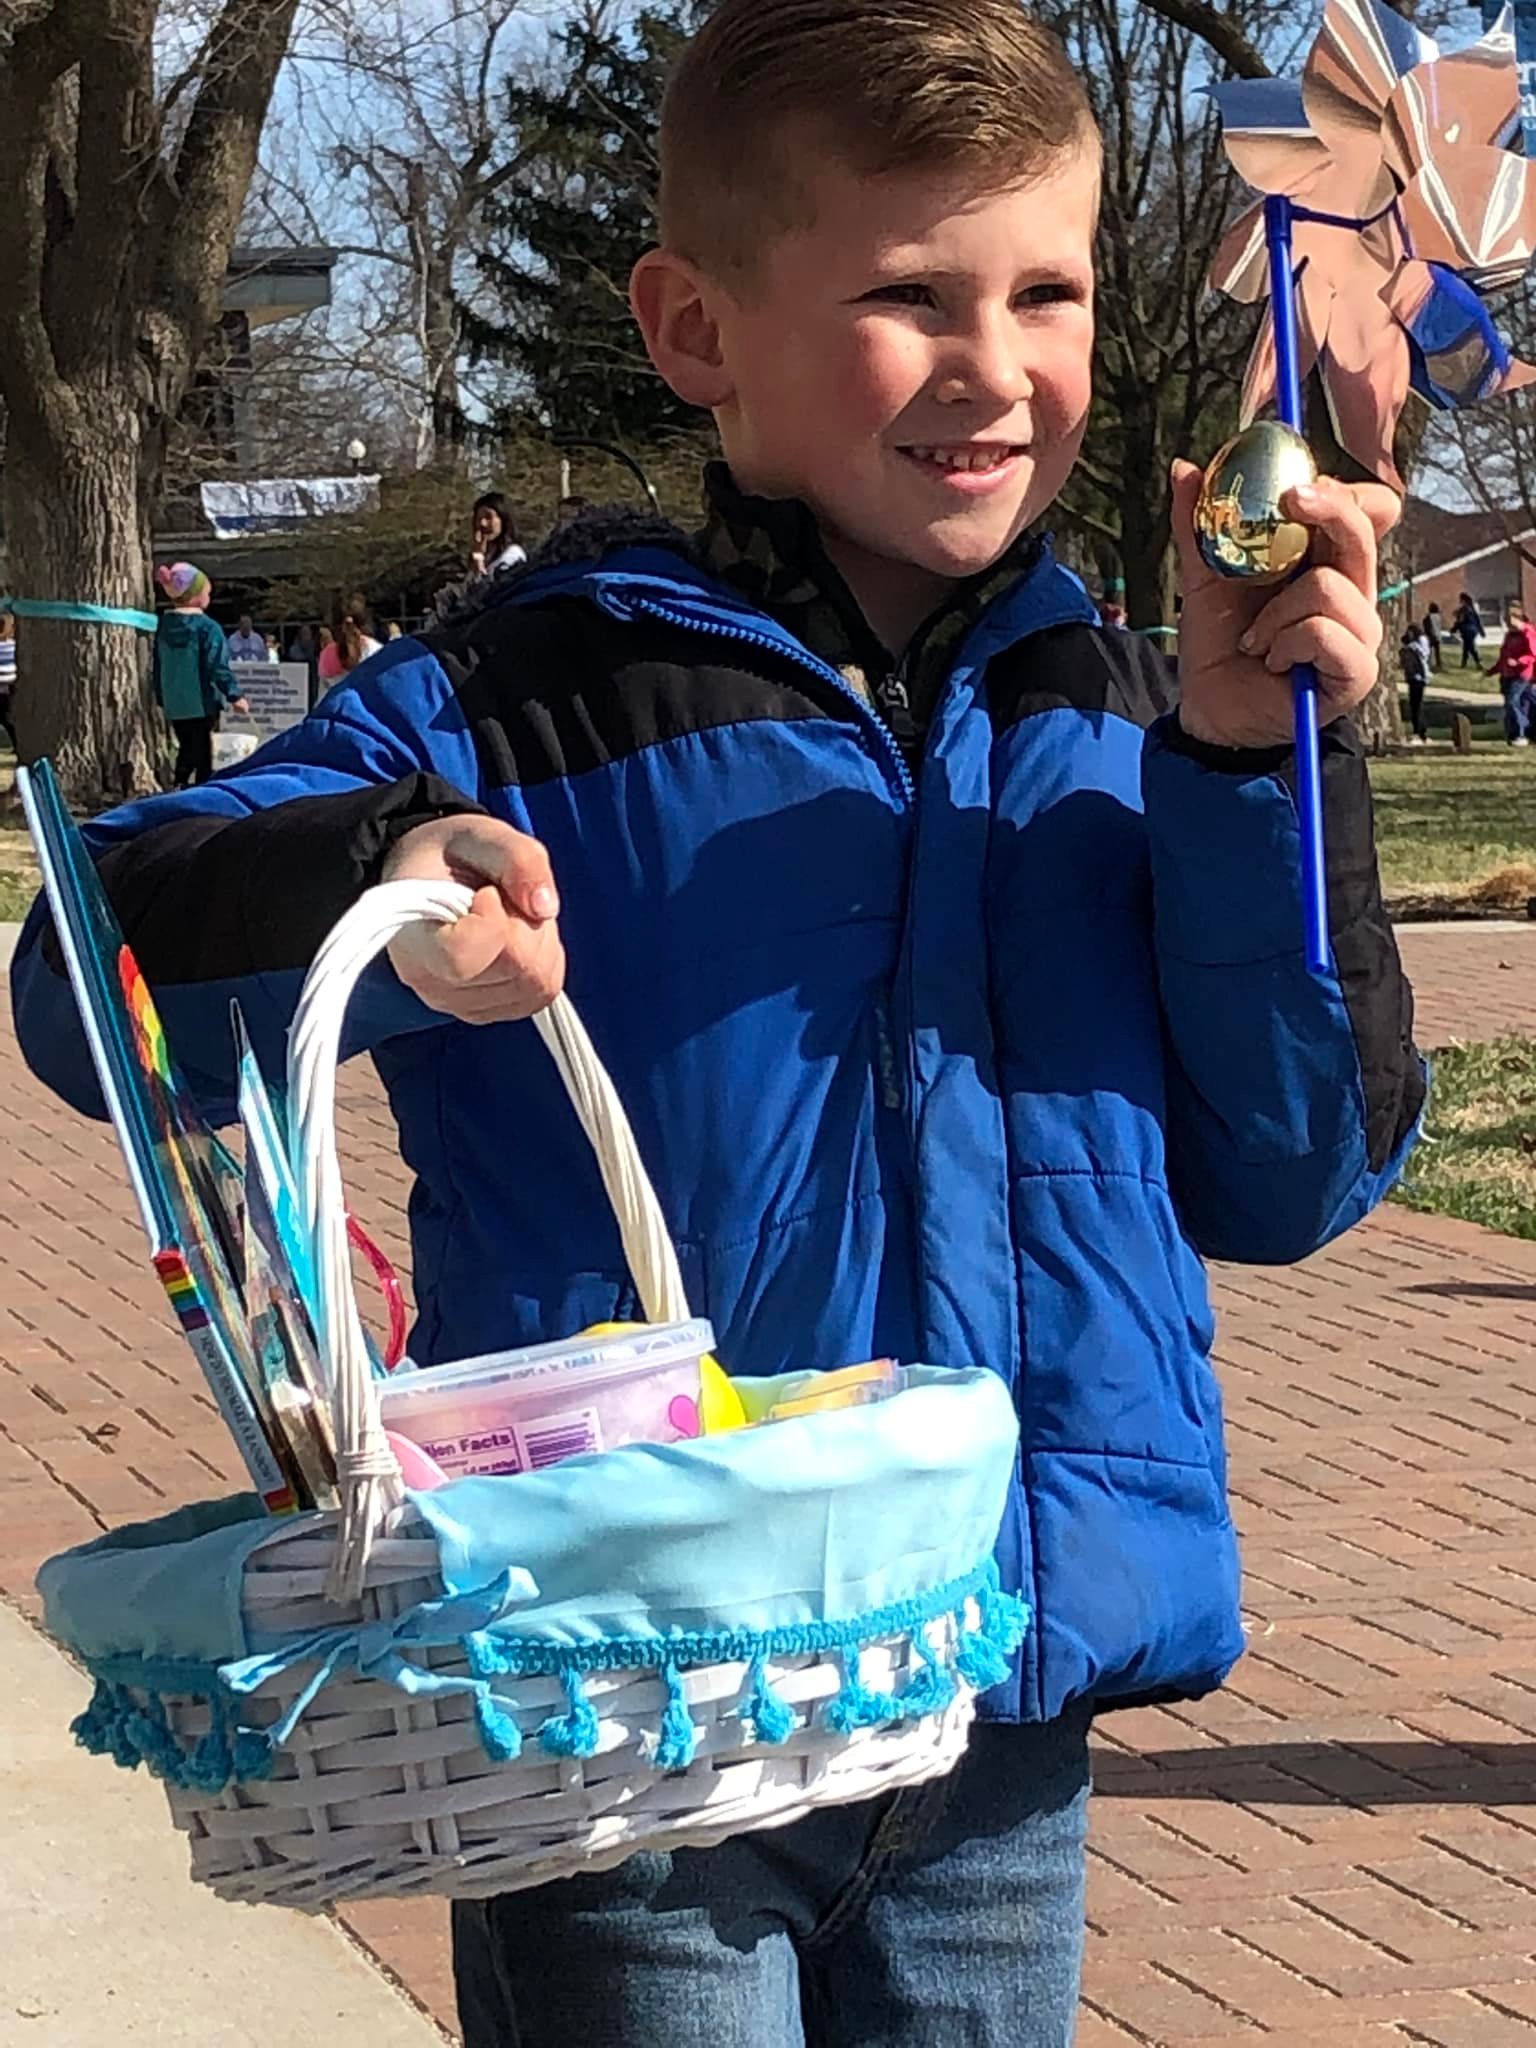 One of the three “Golden Egg” winners happily displays his reward!